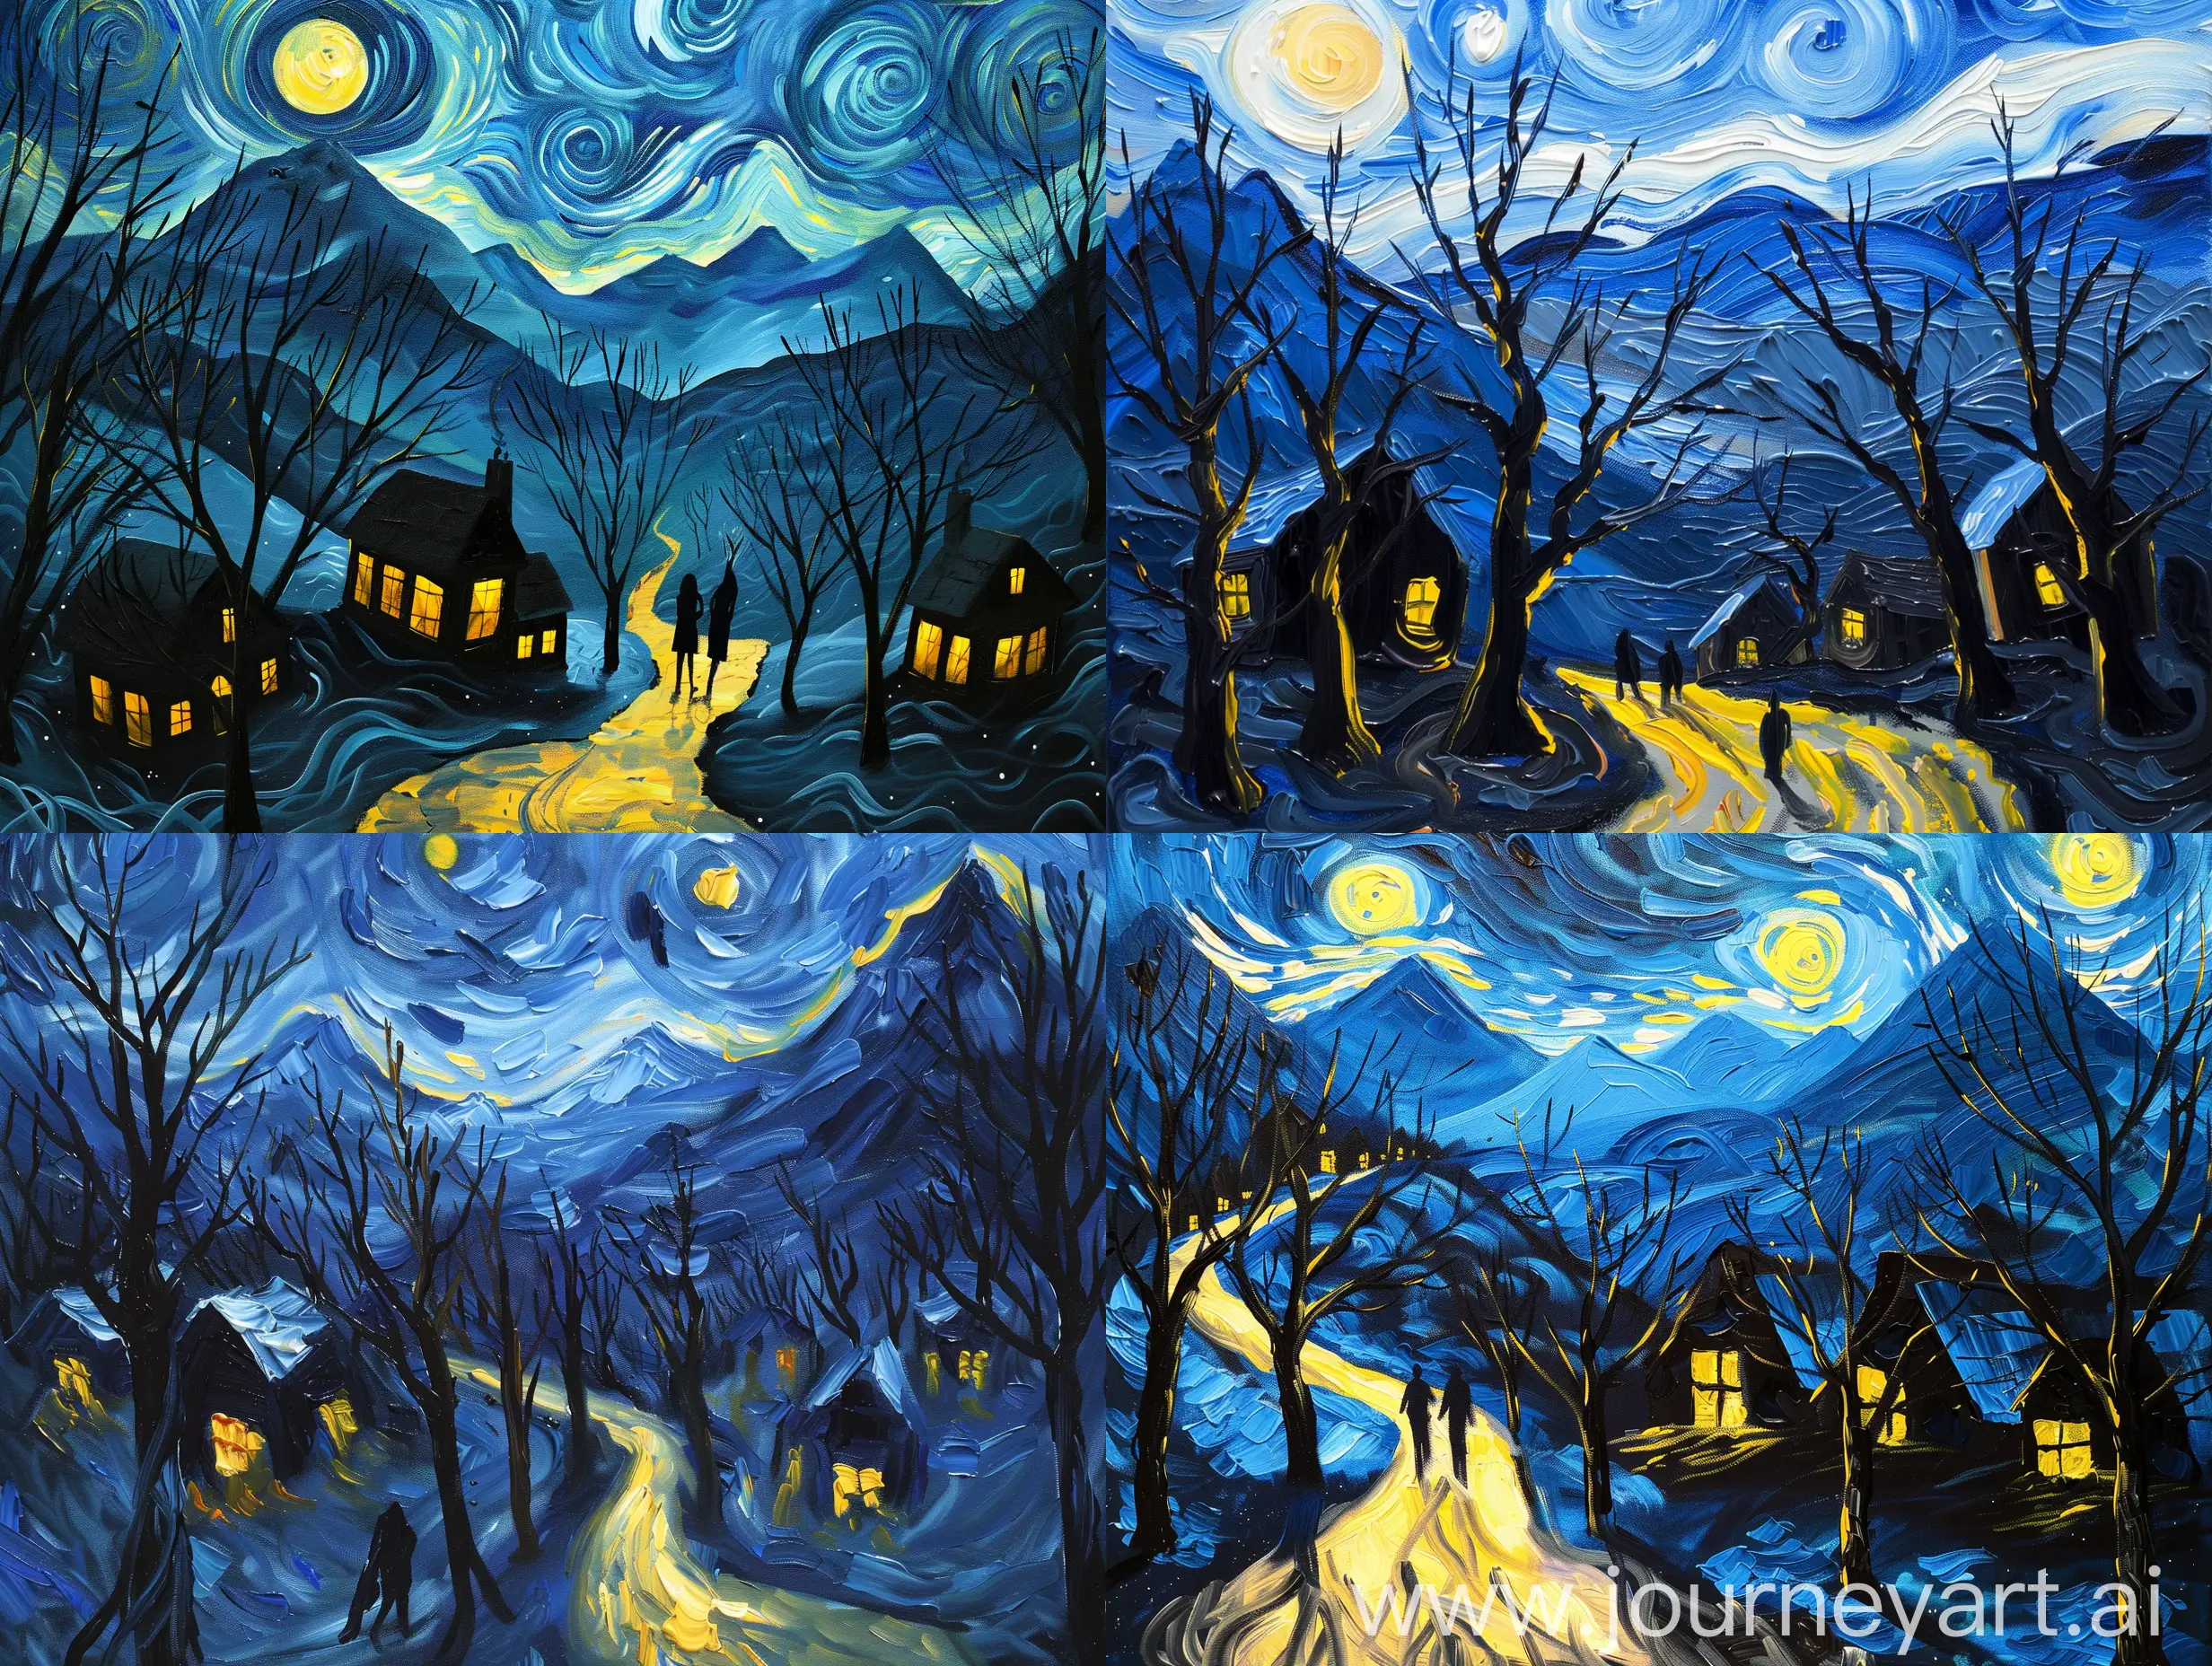 oil painting which captures the essence of a nocturnal landscape with elements of Post-Impressionism

Foreground should Include a path or road with bold strokes of yellow and blue to suggest moonlight reflection.
Add two figures walking away, dressed in dark clothing for silhouette effect.
Midground should include Scatter small, dark houses with glowing windows among bare, leafless trees.
Use swirling lines and dark hues to depict the texture of the trees.
Background should include Feature a large mountain range in shades of blue with snow-capped peaks.
Create a dynamic sky with swirling patterns of blue and black for a turbulent night sky effect.
Color Palette should Use a striking palette of blues, yellows, and blacks for vibrancy and energy.
Contrast warm yellows against cool blues for visual impact.
Unique Features should
Apply thick paint application and depart from realistic representation for emotional expression.
Emphasize mood and atmosphere through color and brushwork.
By incorporating these detailed elements and following the style and color palette described, you can create a similar artwork that captures the beauty and emotion of a nocturnal journey in a Post-Impressionist style.